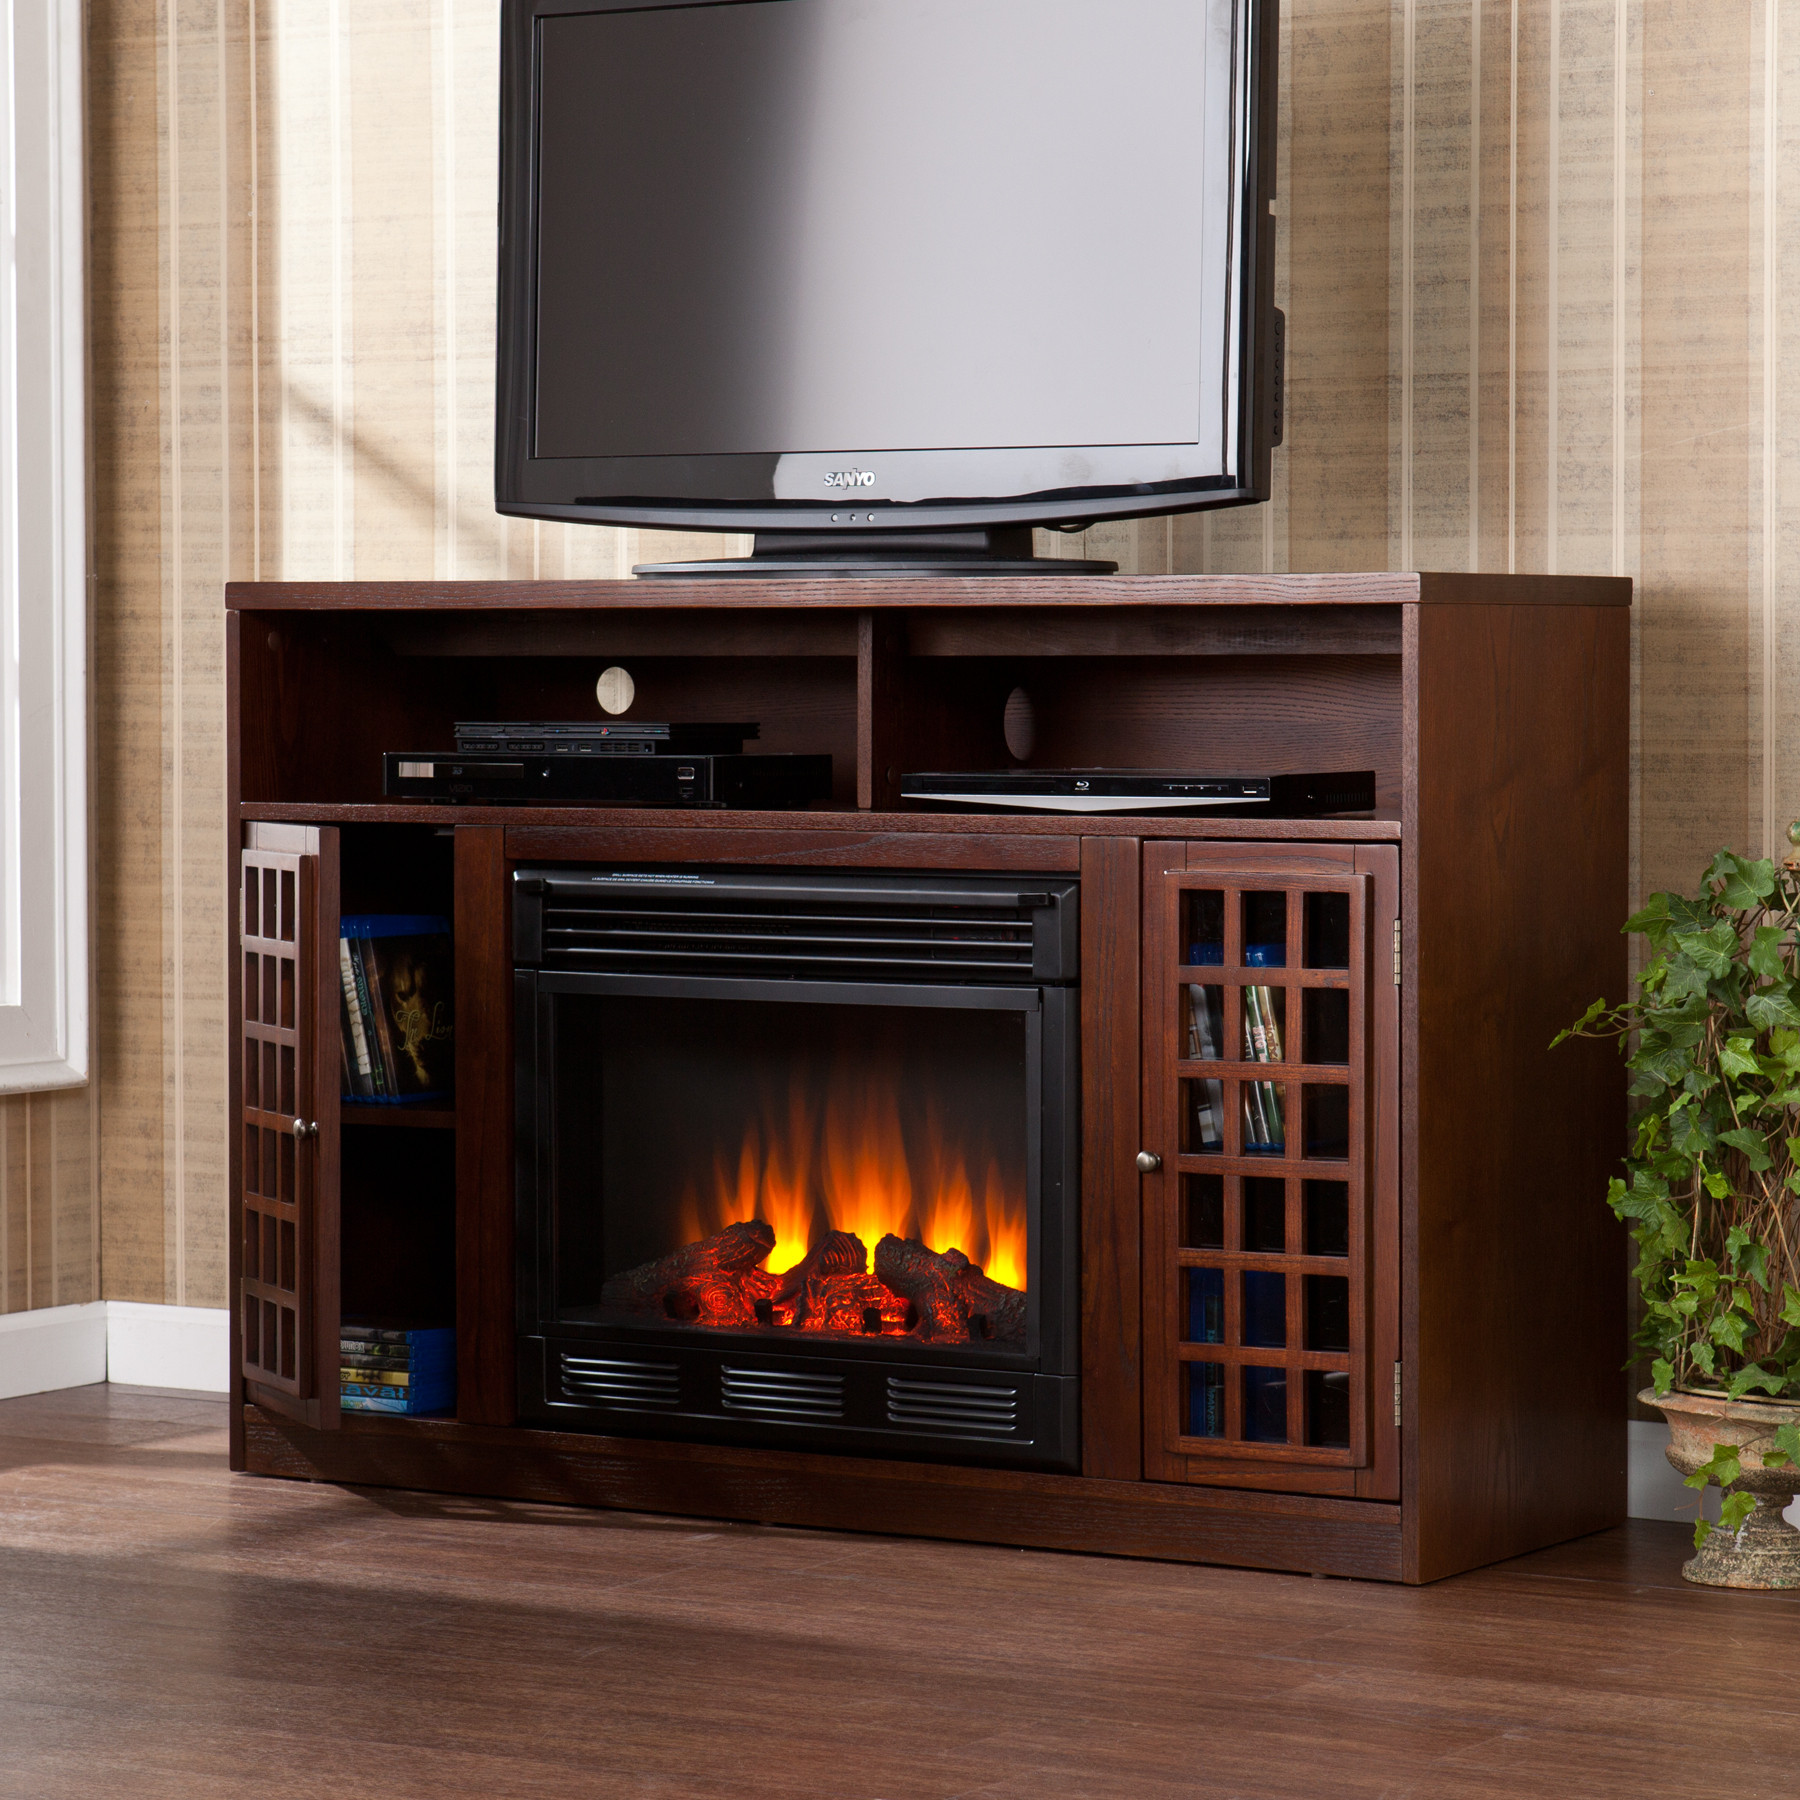 Menards Electric Fireplace Tv Stands
 Awesome Menards Fireplace Tv Stand 7 Electric Fireplace